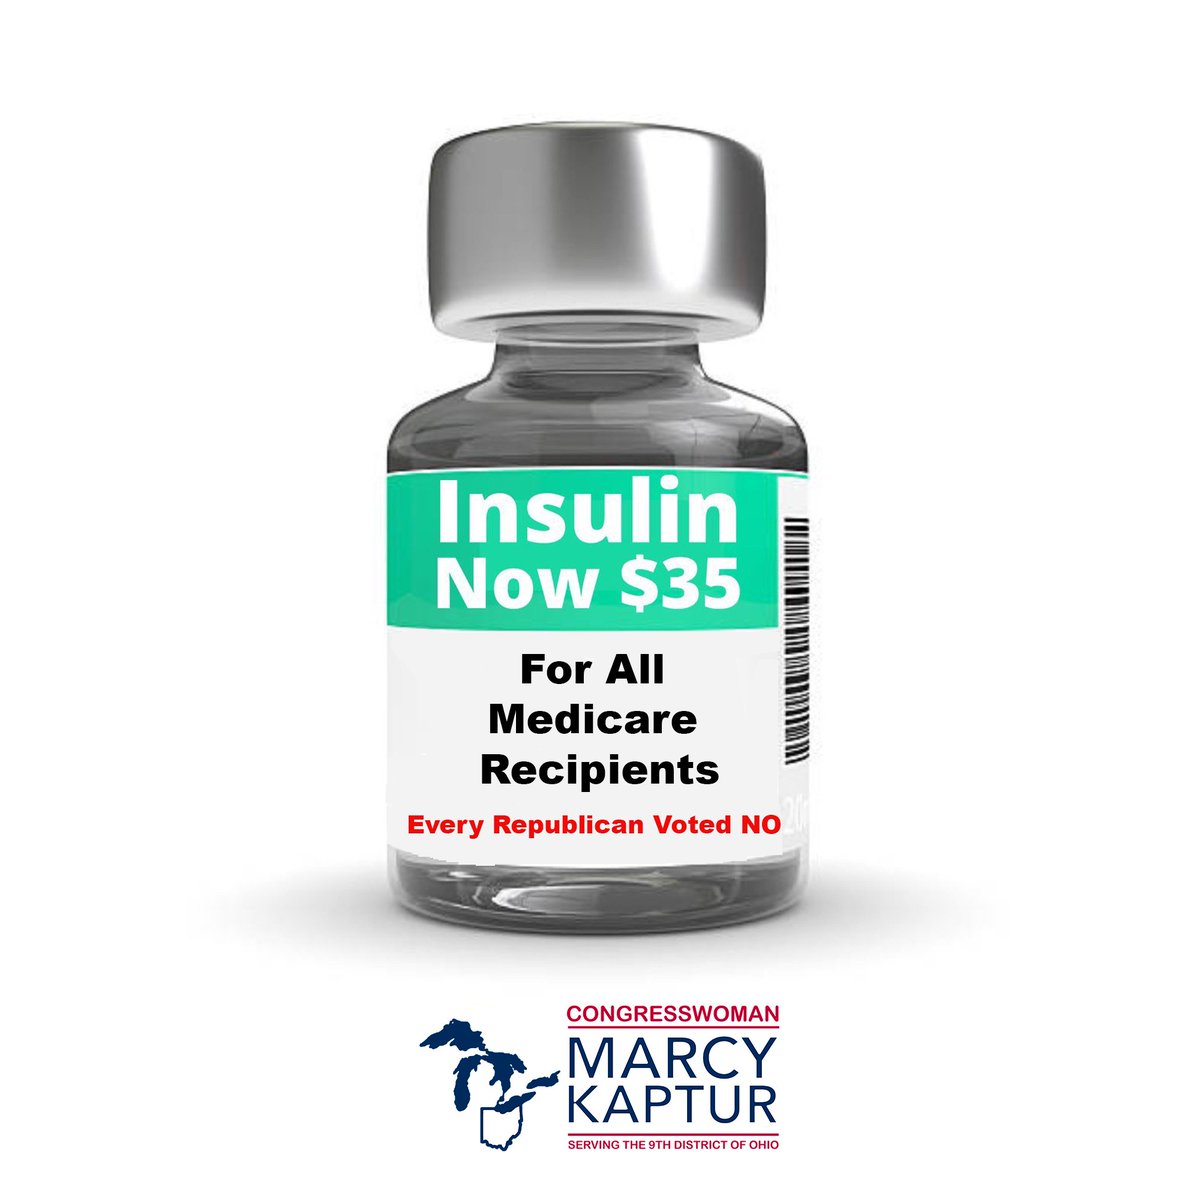 🚨Important Update🚨 Democrats stood up to big Pharma and Insurance. Starting tomorrow, July 1, insulin will be capped at $35 per month for Medicare users. Every Republican voted NO.